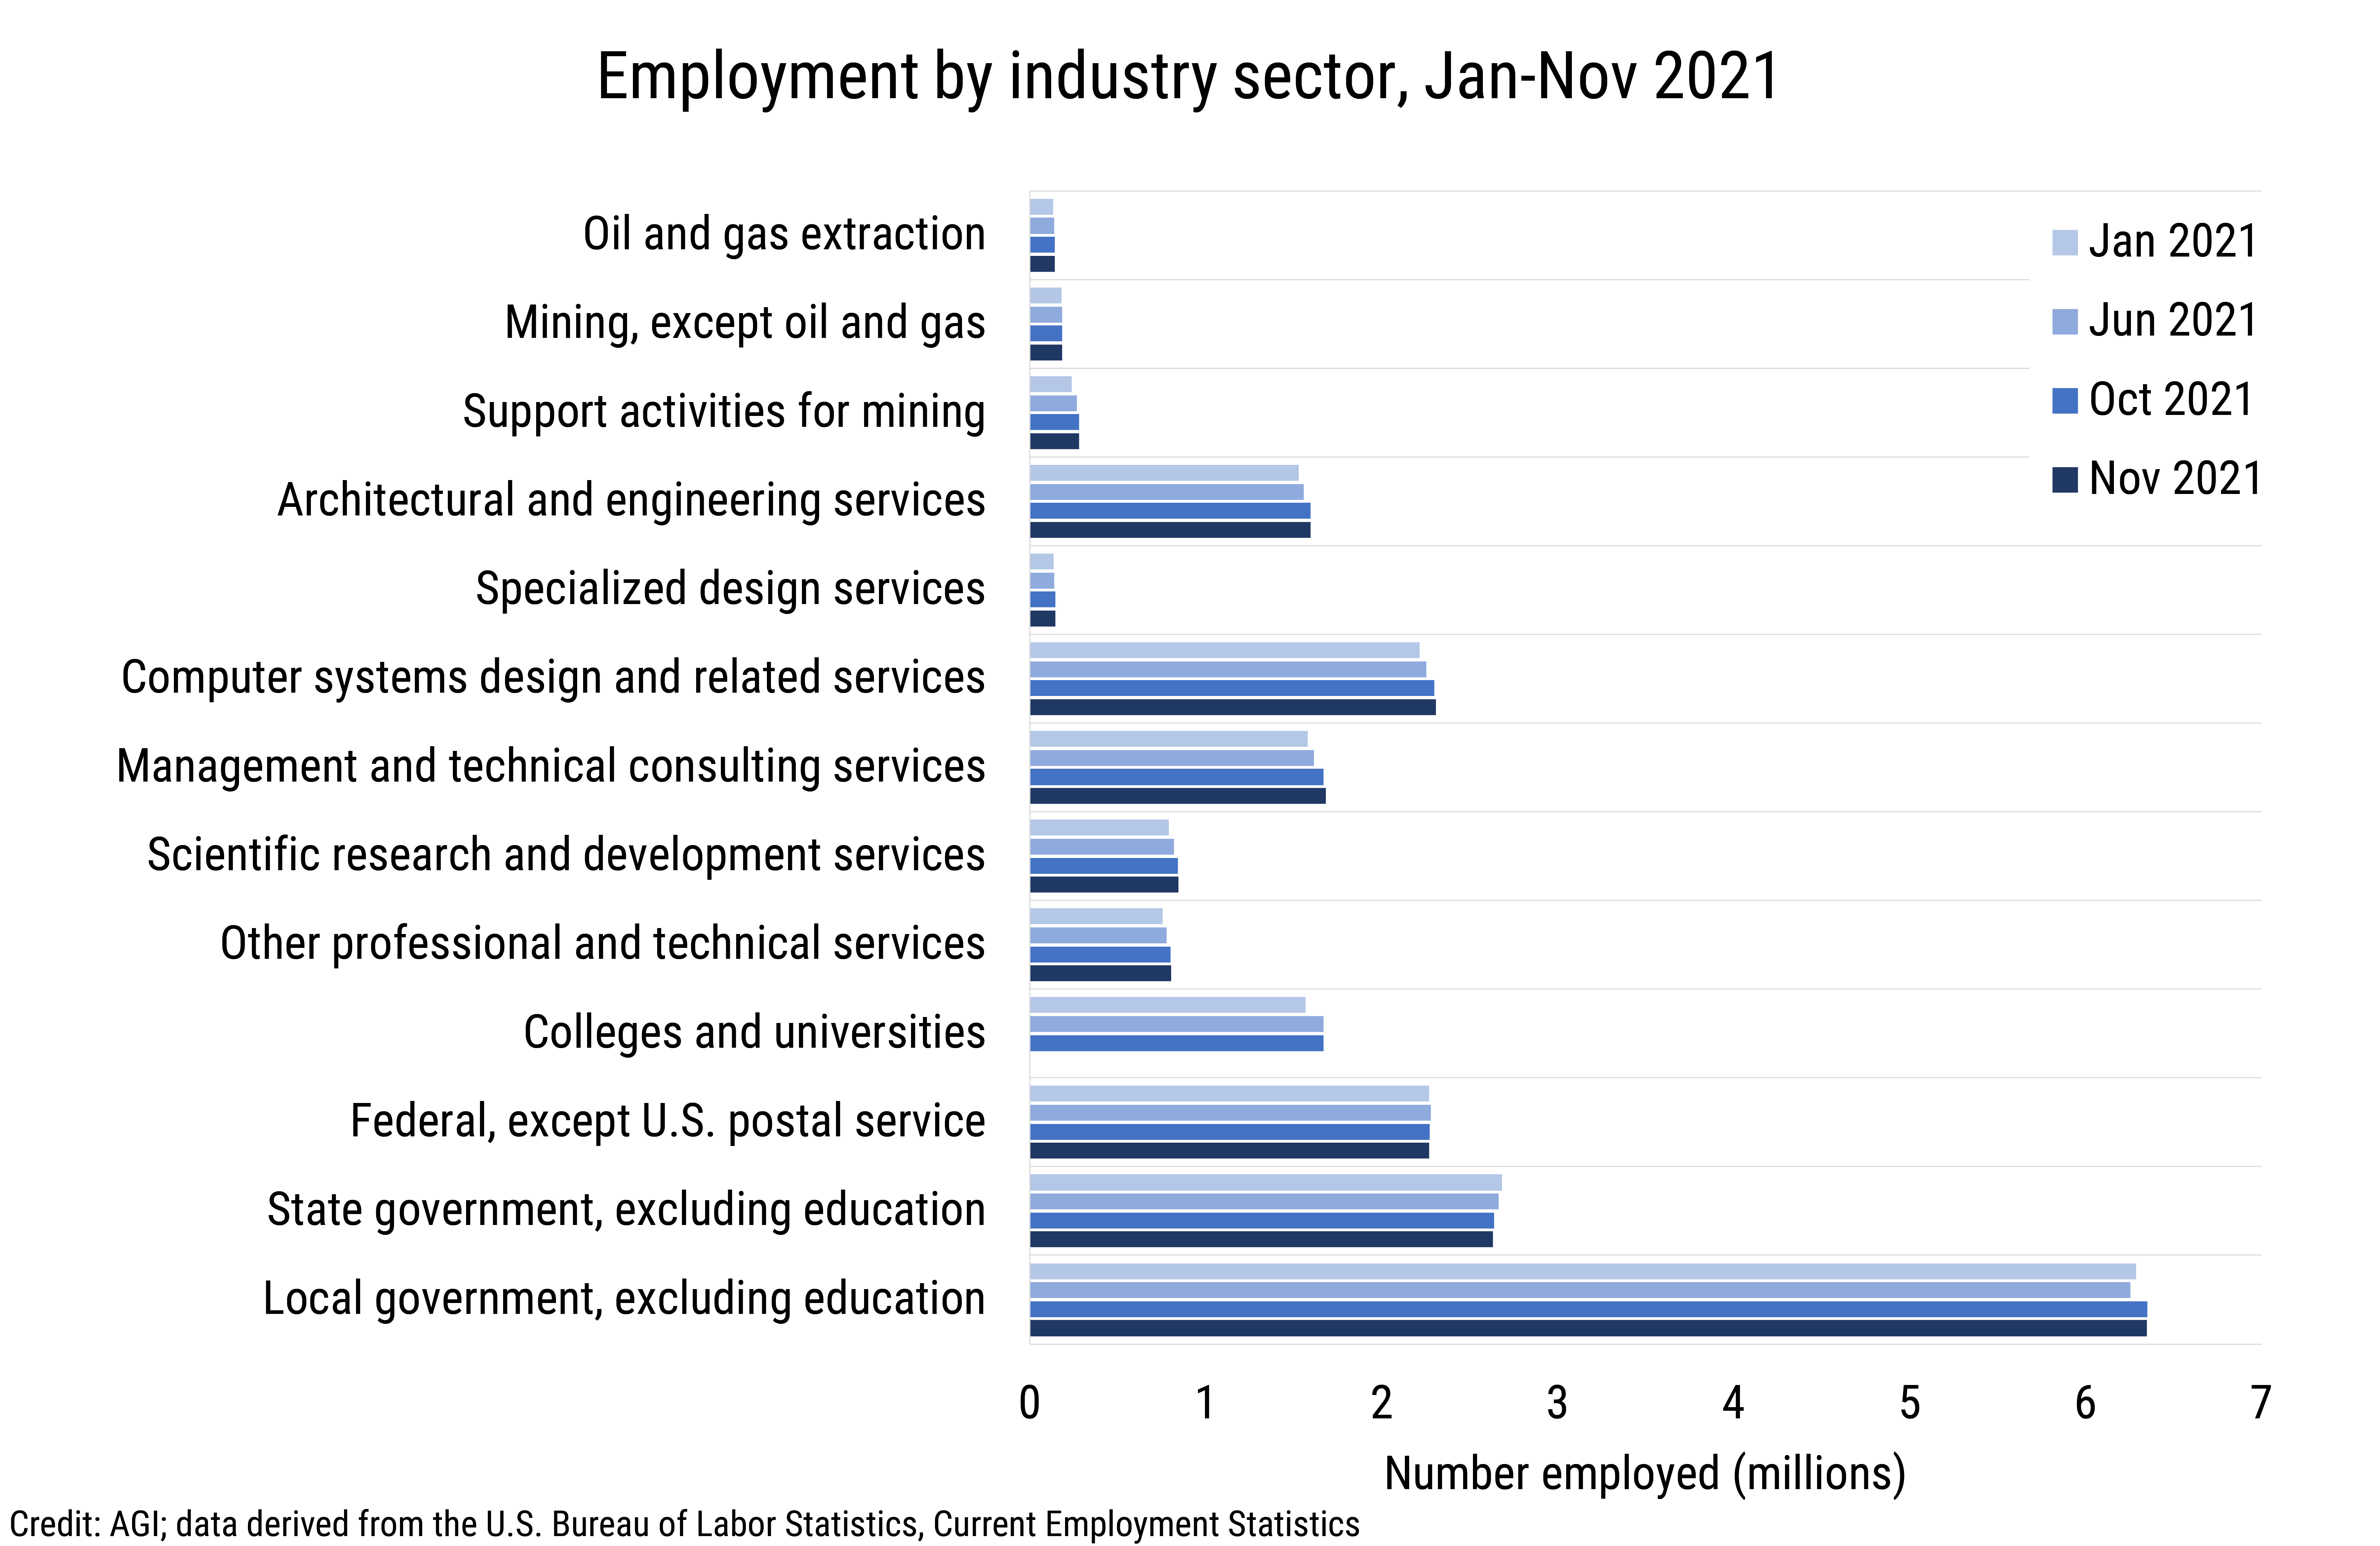 DB_2022-001 chart 03: Employment by industry sector, Jan-Nov 2021 (Credit: AGI; data derived from the U.S. Bureau of Labor Statistics, Current Employment Statistics)